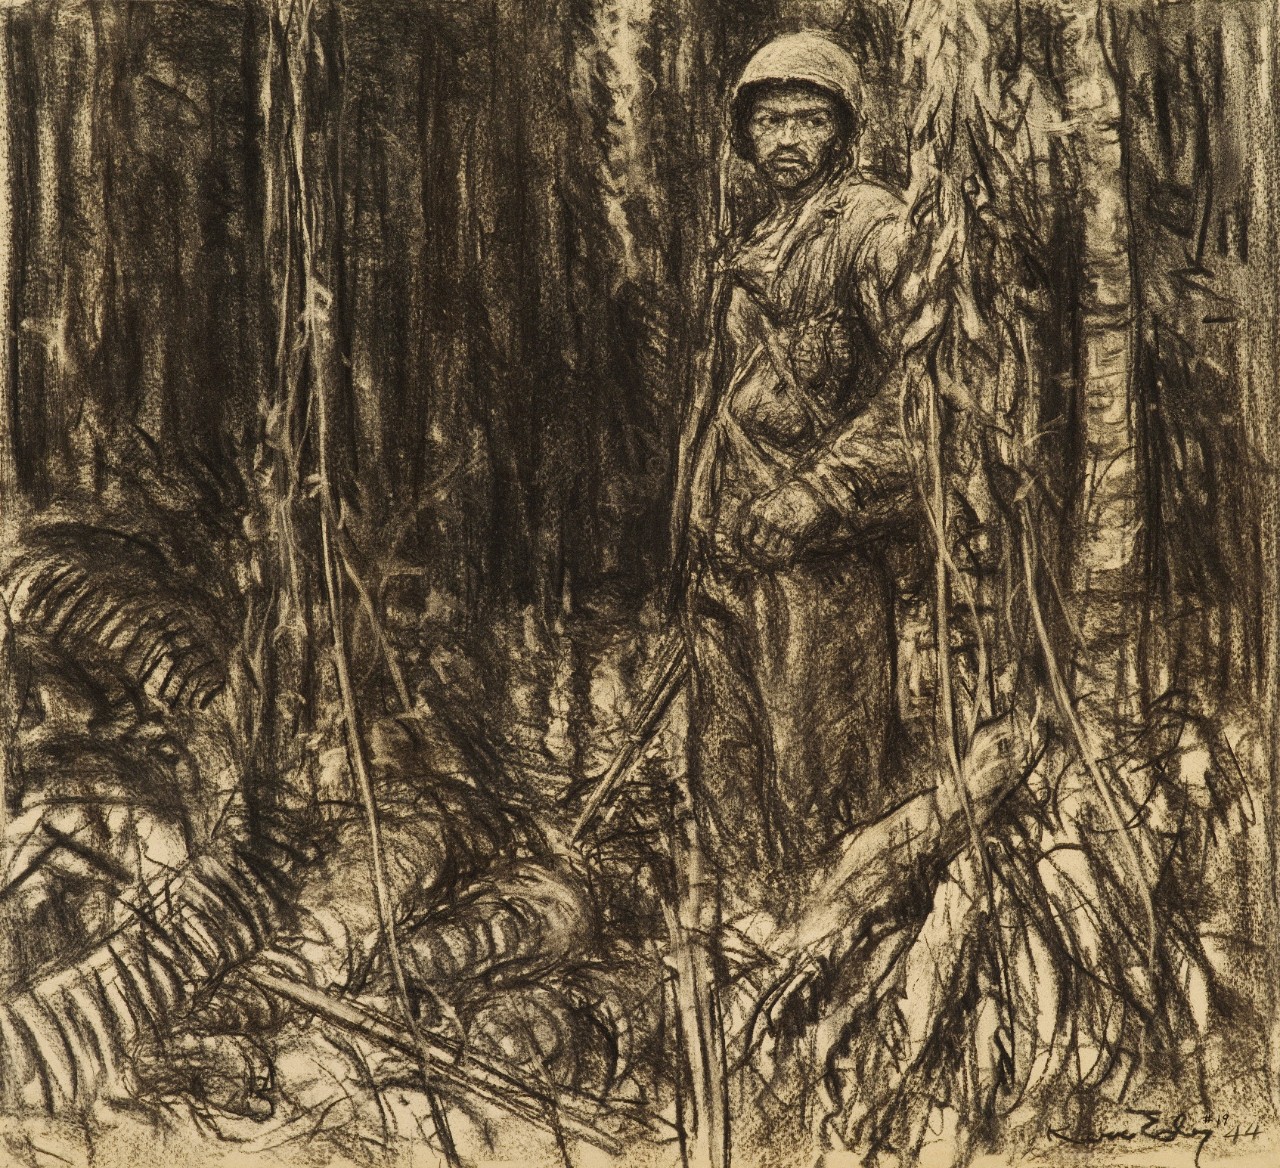 A Marine standing in the jungle